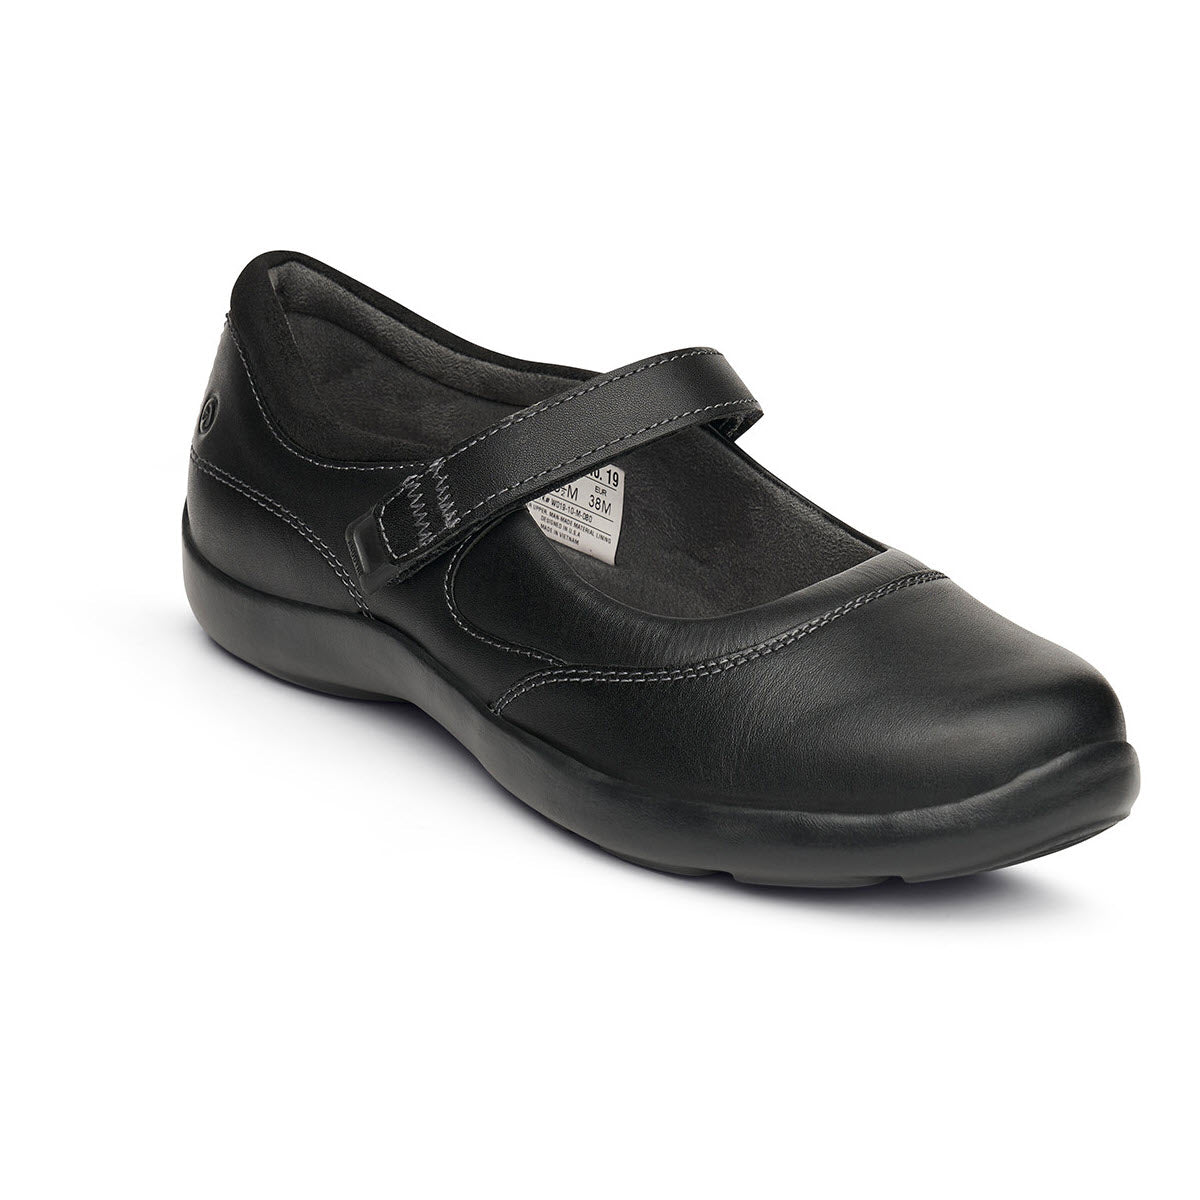 Anodyne orthotic-friendly black leather Mary Jane-style shoe with a single strap closure.